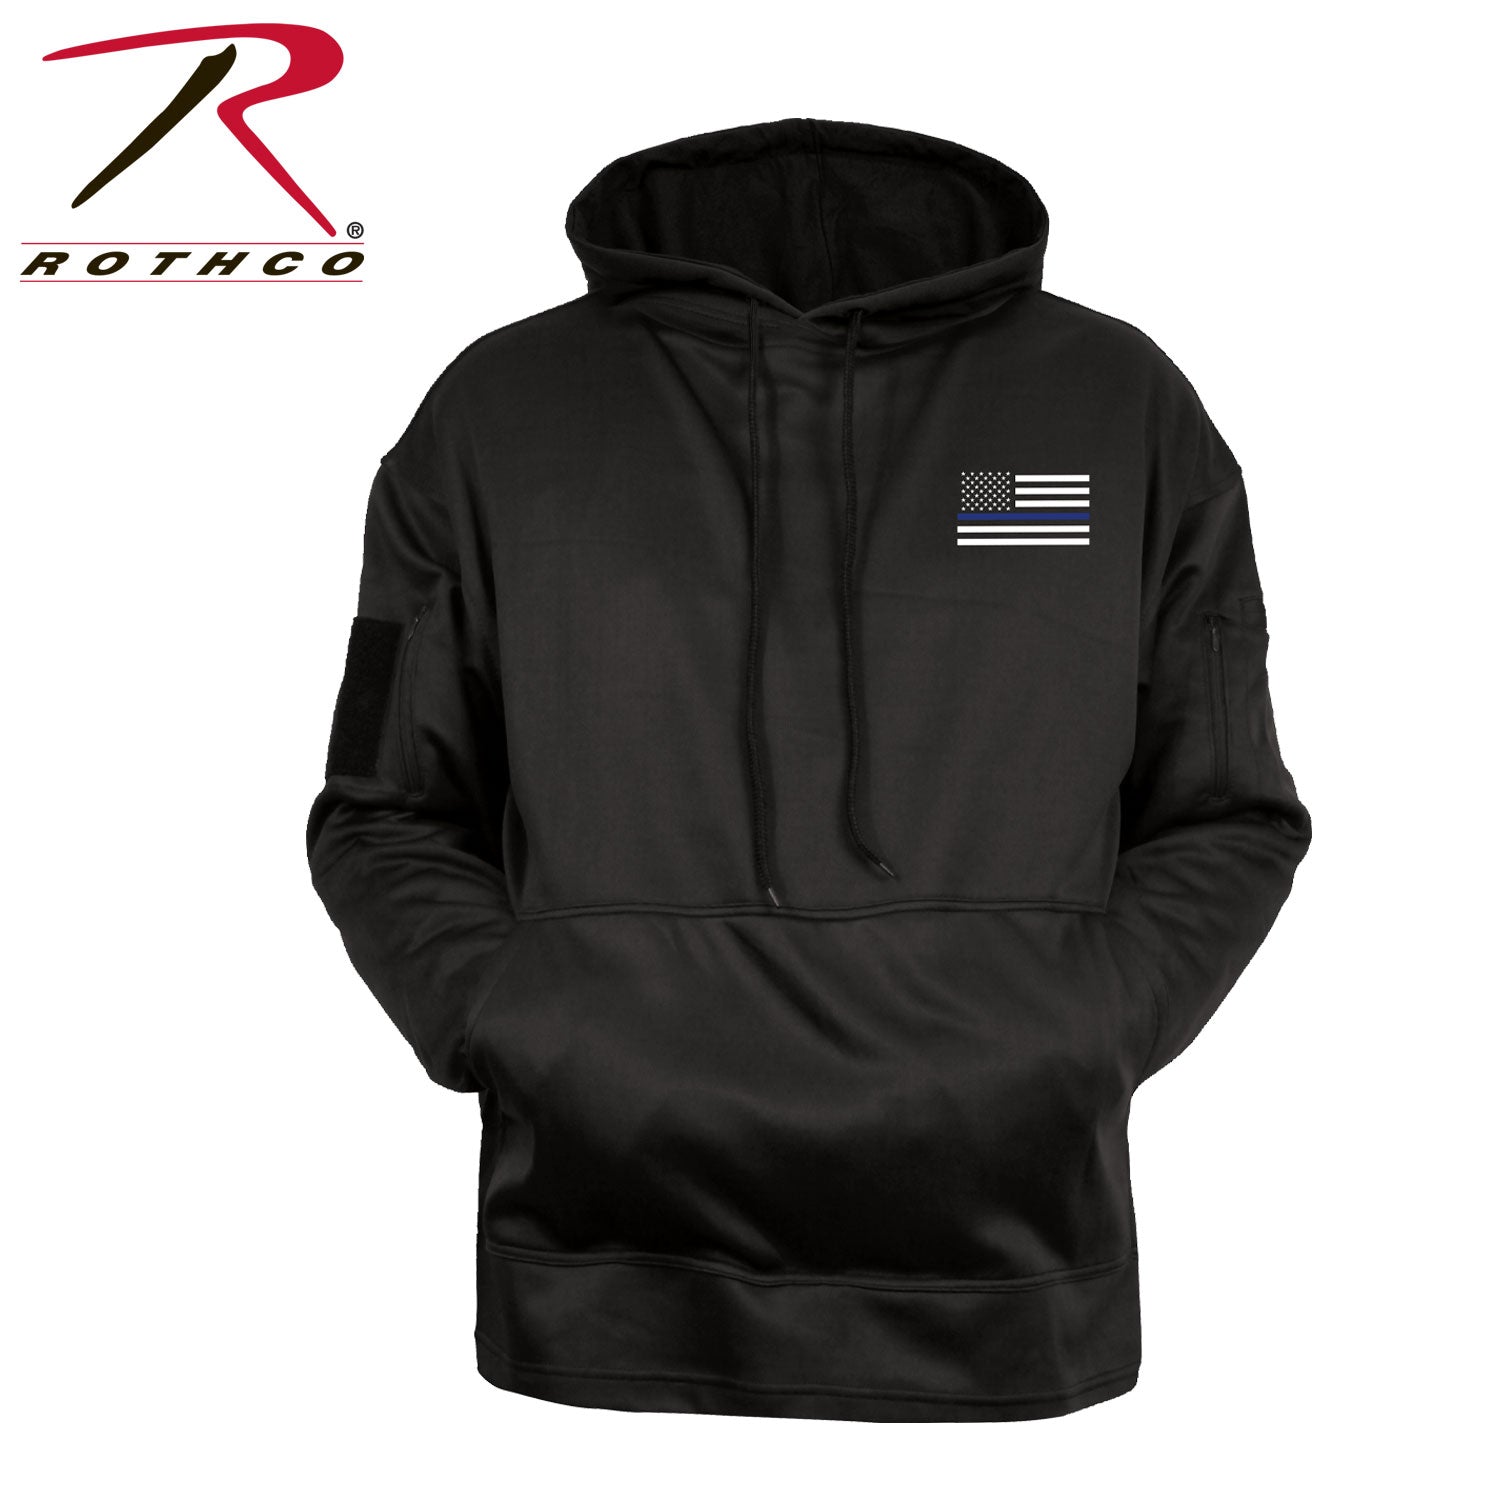 Rothco Honor and Respect Thin Blue Line Concealed Carry Hoodie